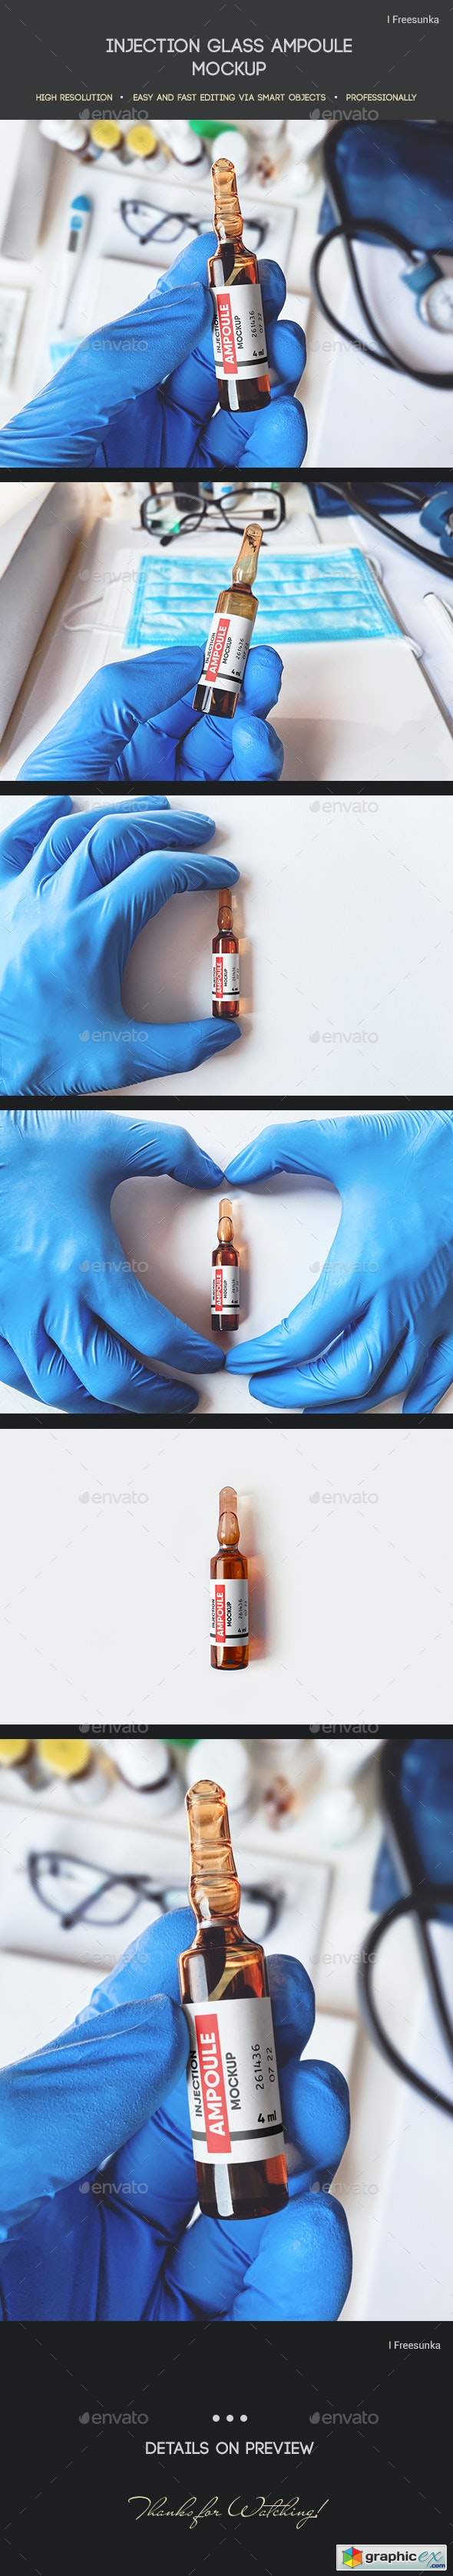 Injection Glass Ampoule Mockup 